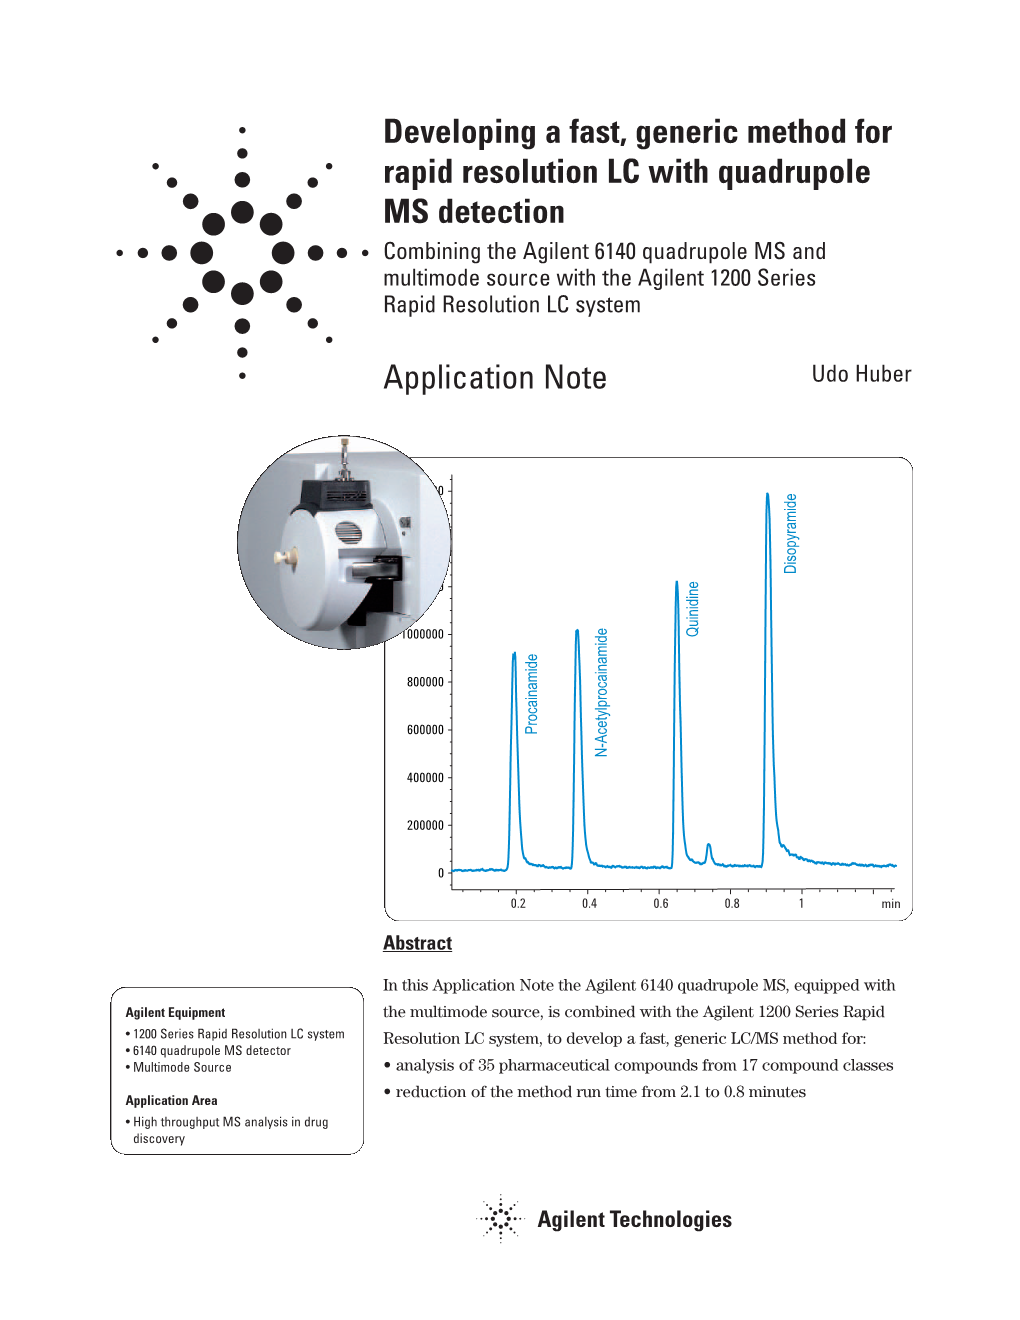 Developing a Fast, Generic Method for Rapid Resolution LC with Quadrupole